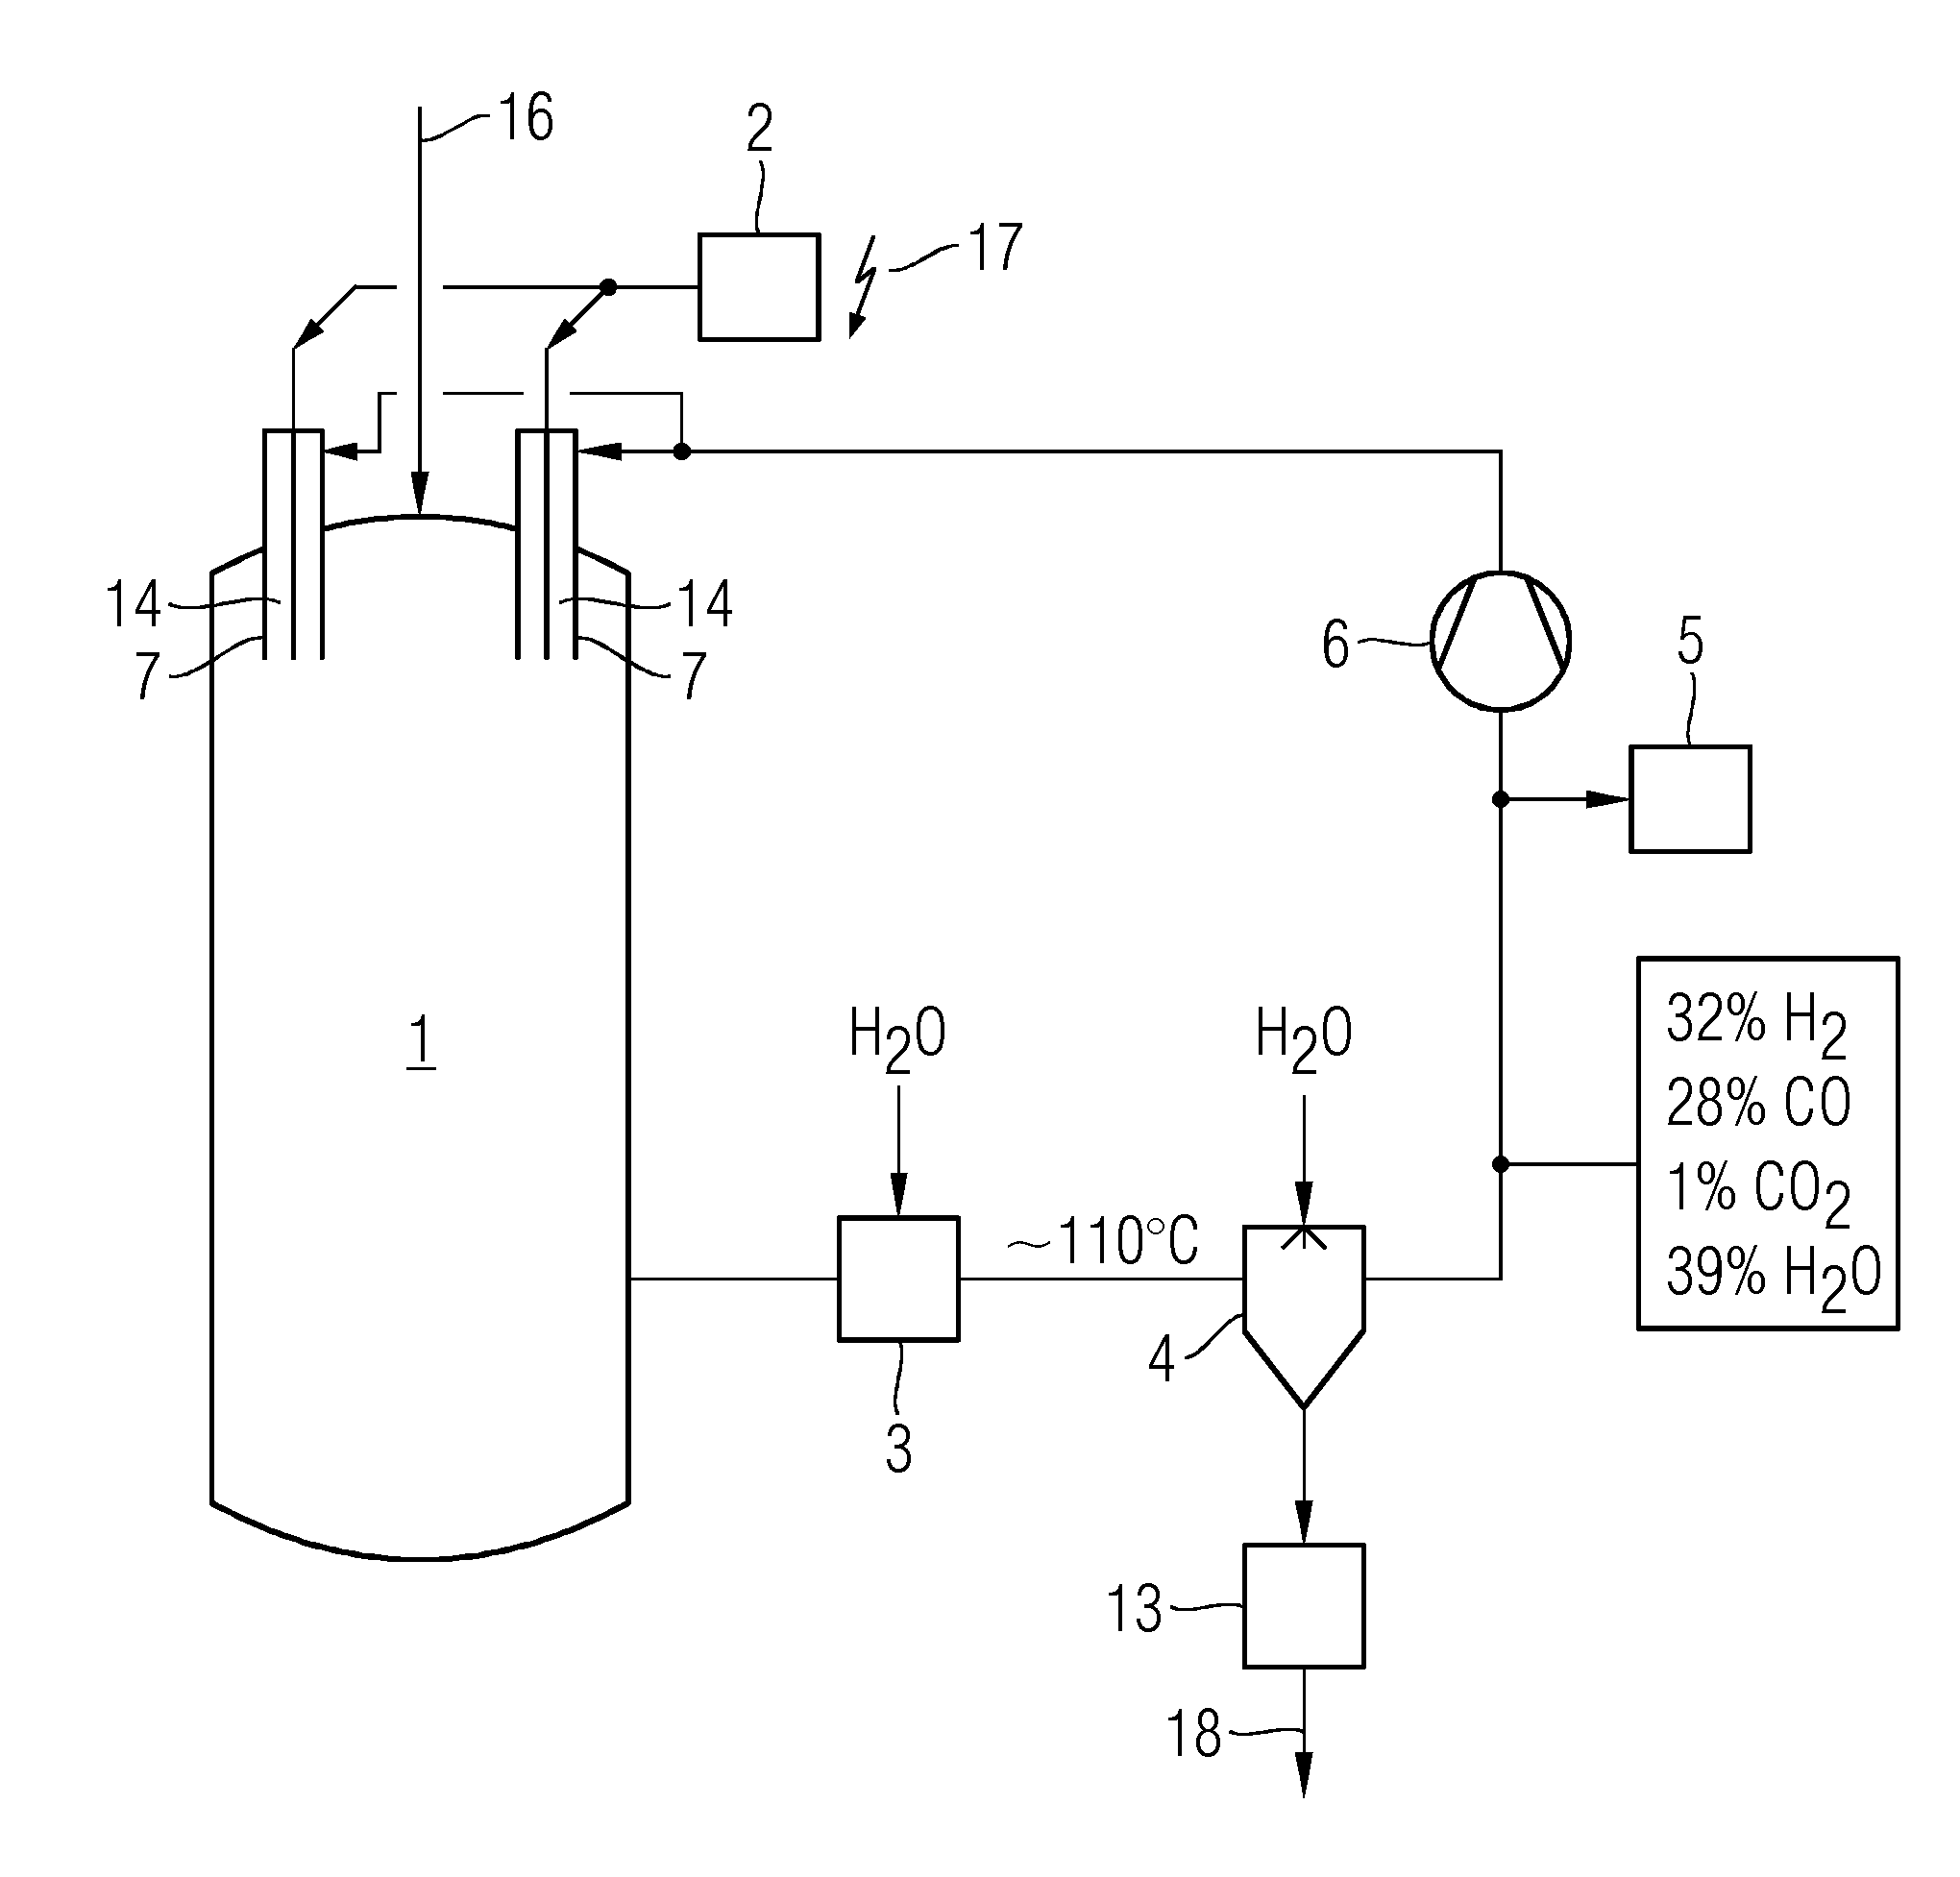 Entrained flow gasifier having an integrated intermediate temperature plasma